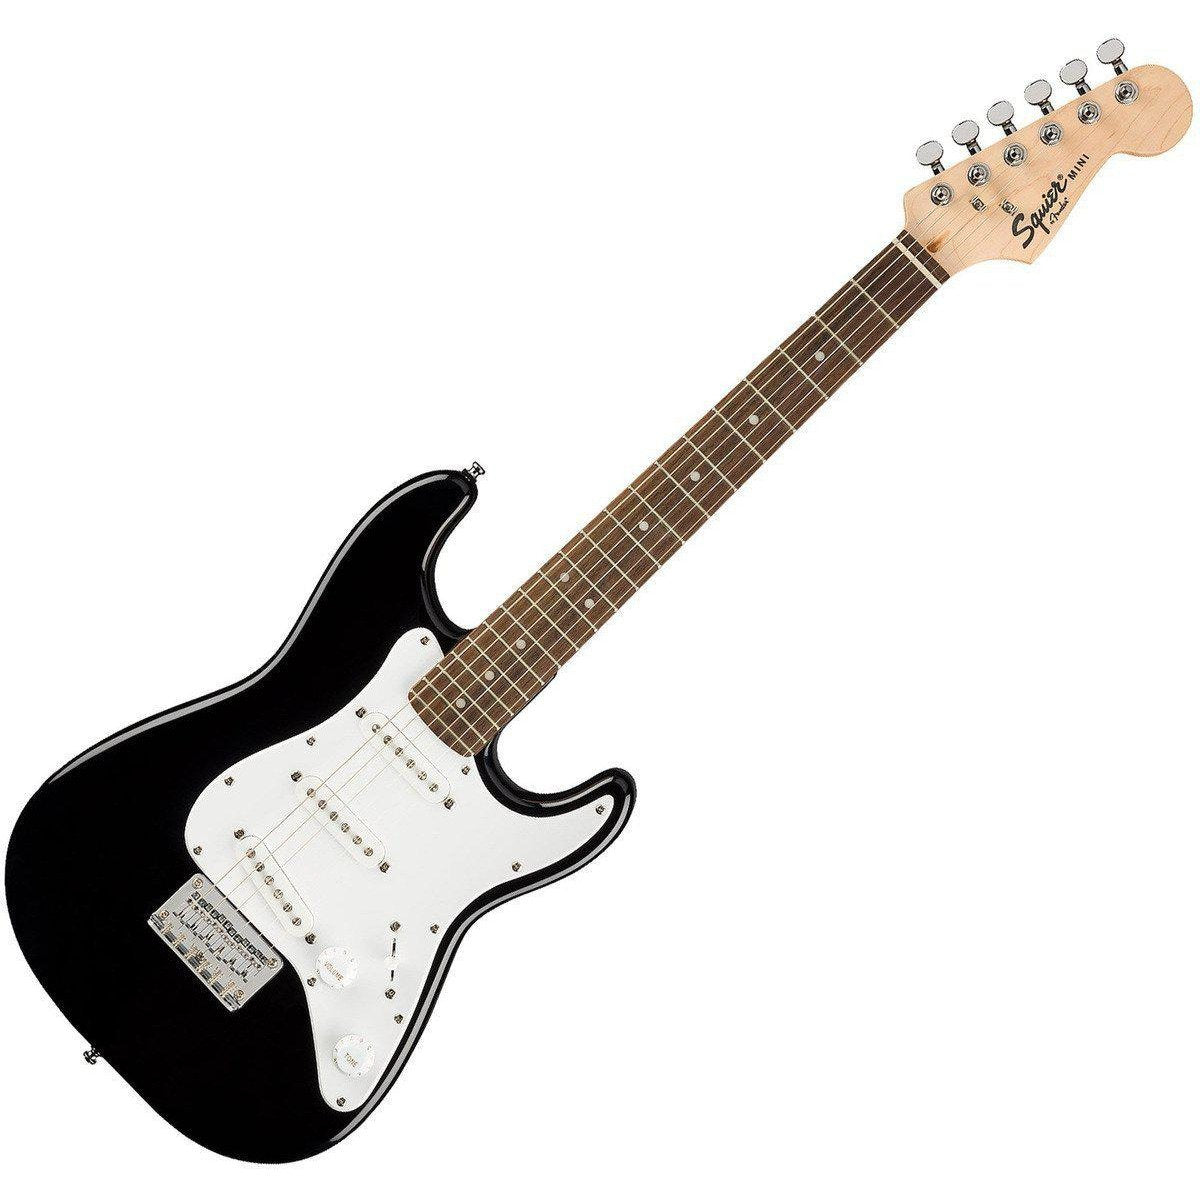 Electric guitar  Definition, History, & Fender Stratocaster